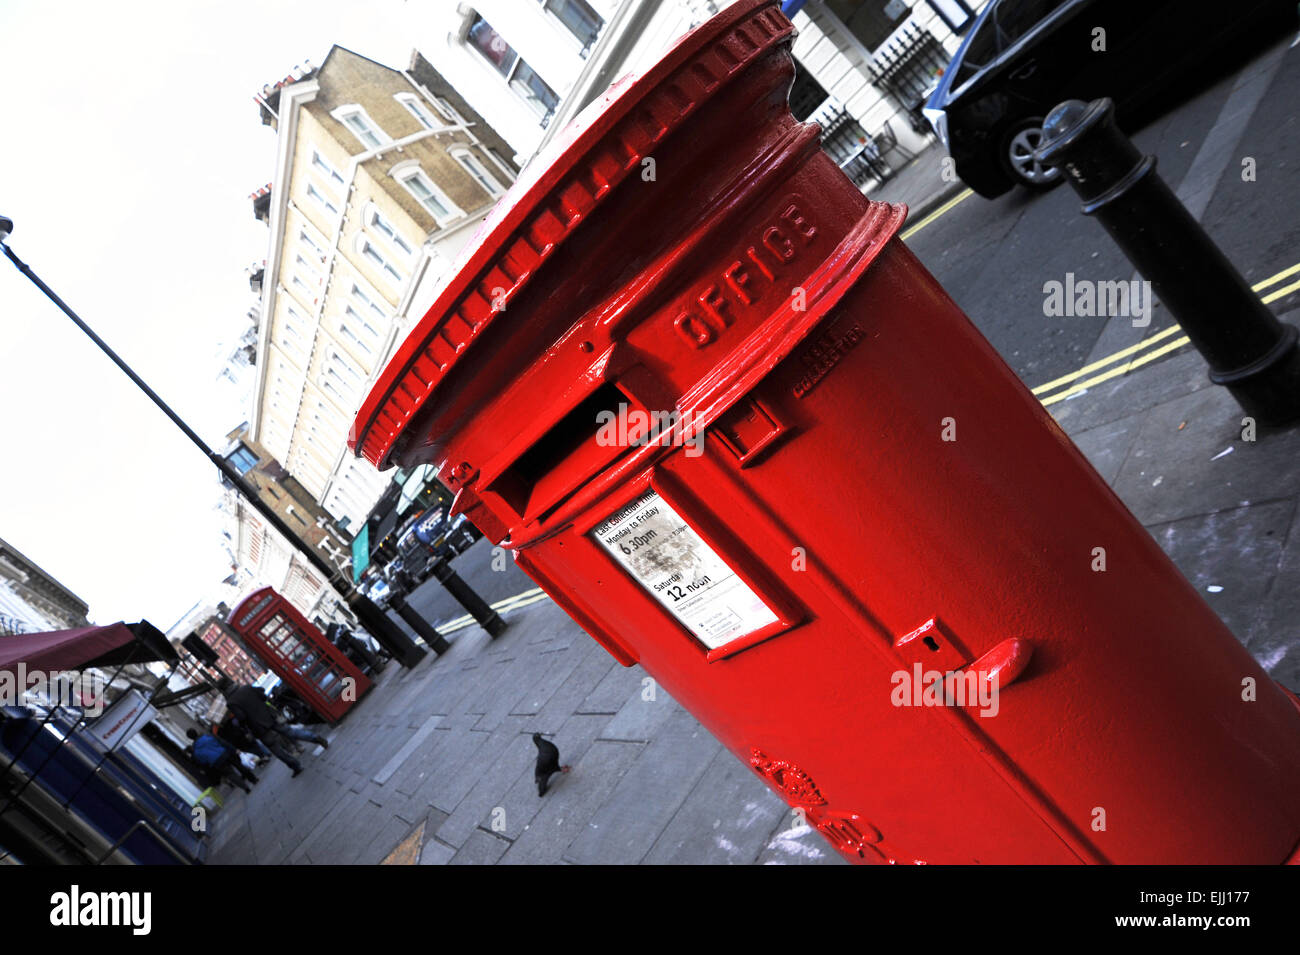 London England UK -  Red Royal Mail post box in Covent Garden area Stock Photo